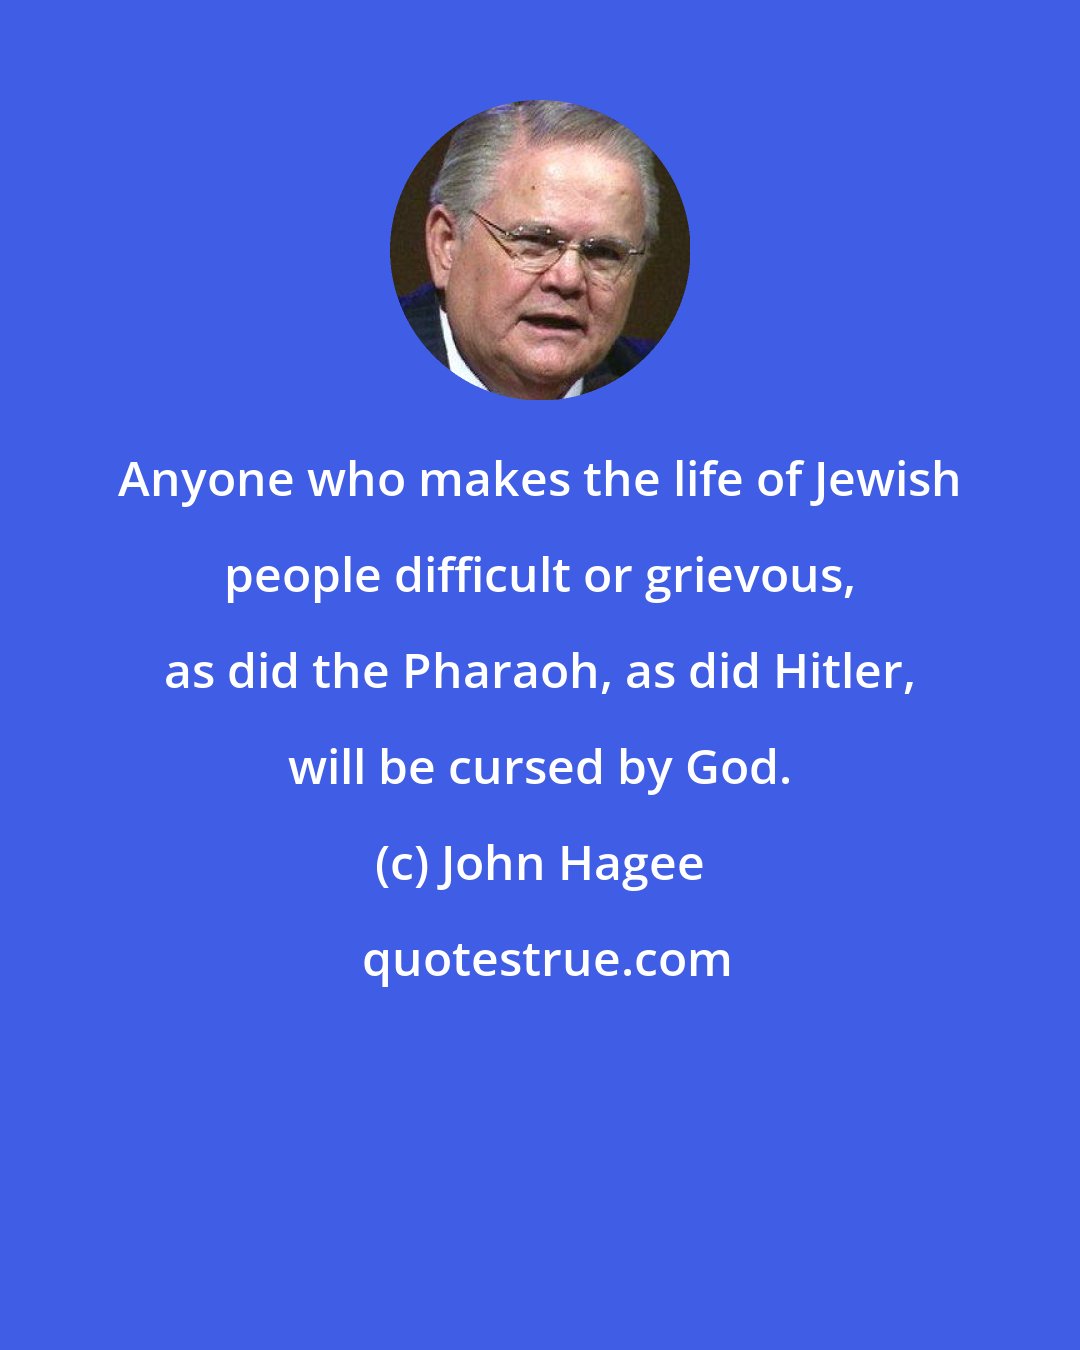 John Hagee: Anyone who makes the life of Jewish people difficult or grievous, as did the Pharaoh, as did Hitler, will be cursed by God.